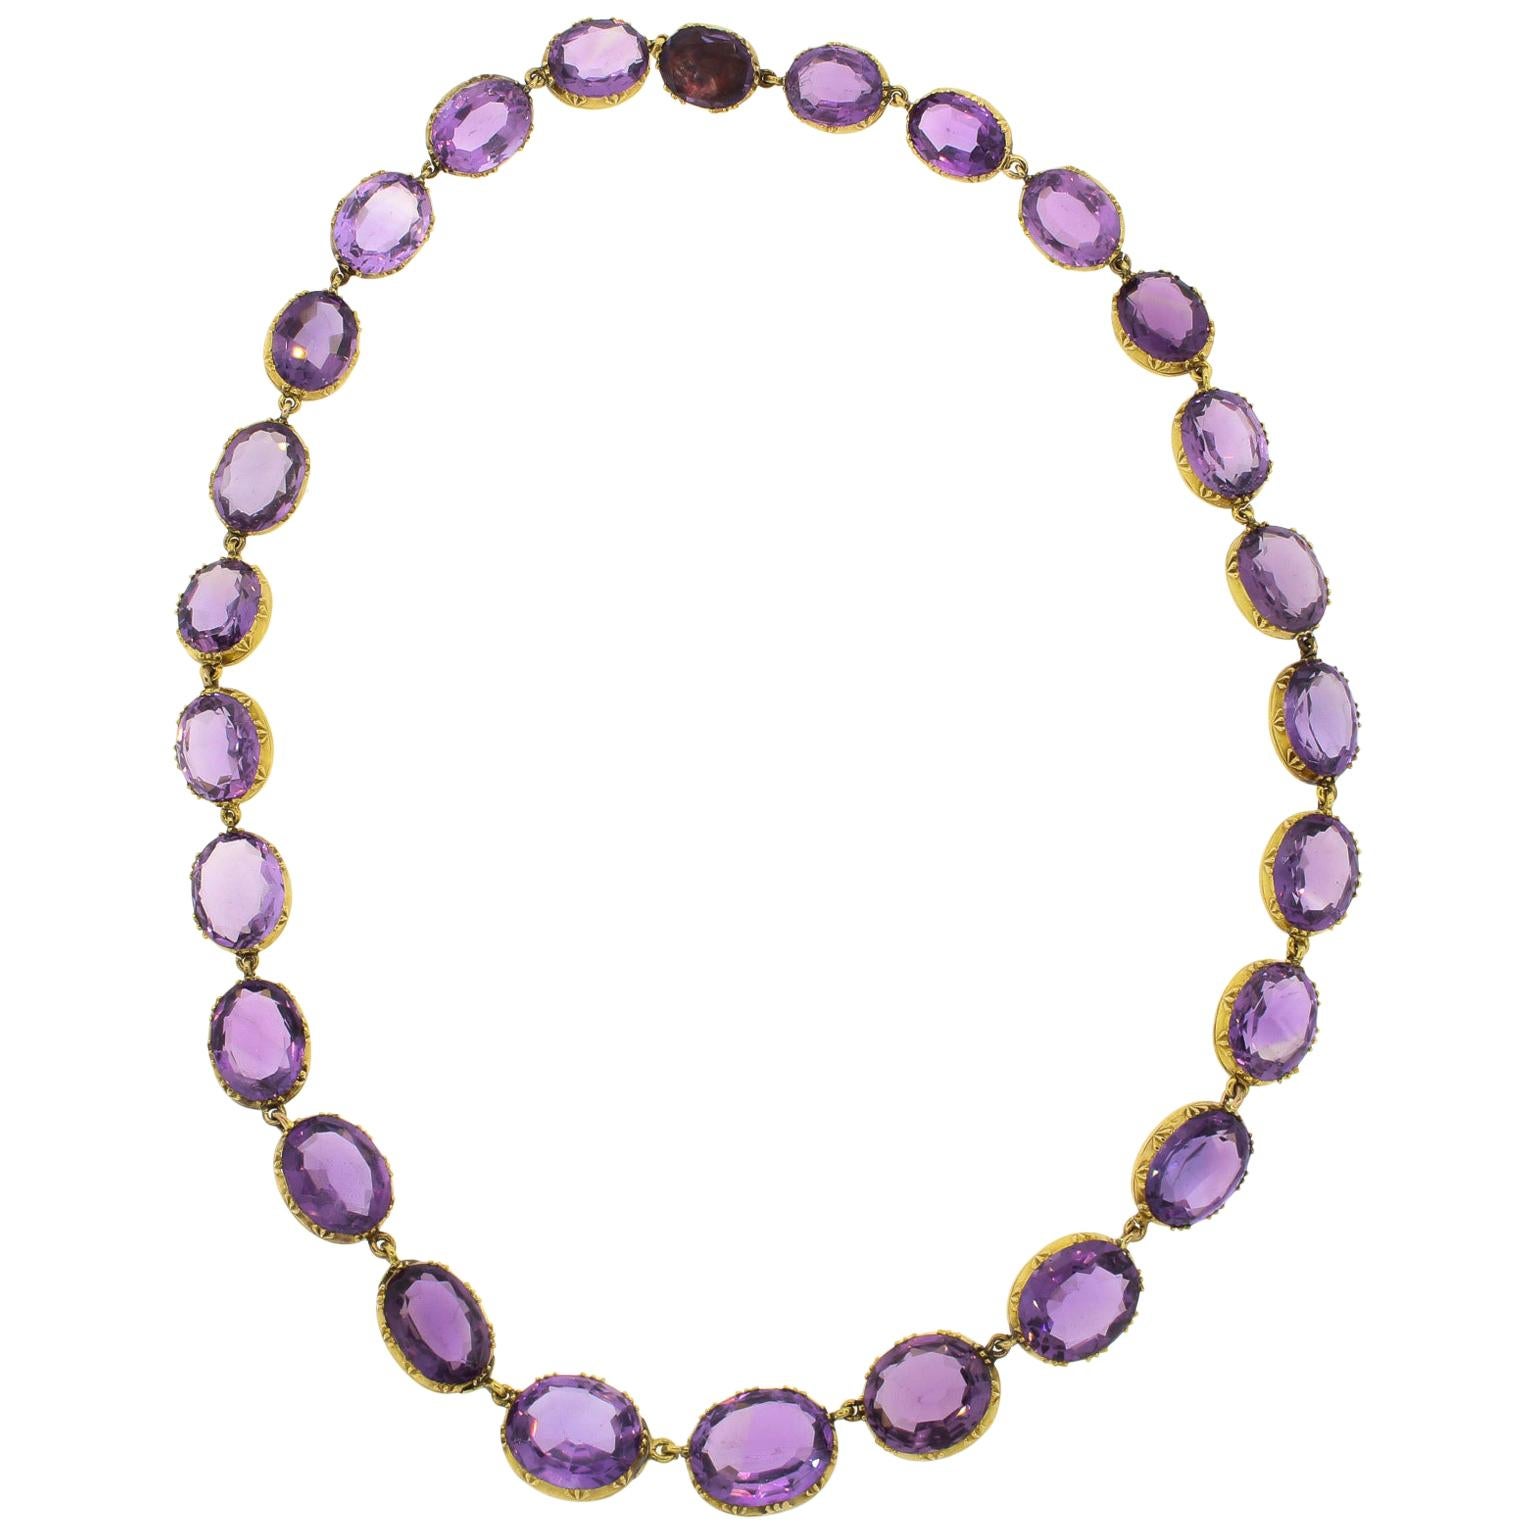 Antique Late Victorian Gold Amethyst Riviere Necklace